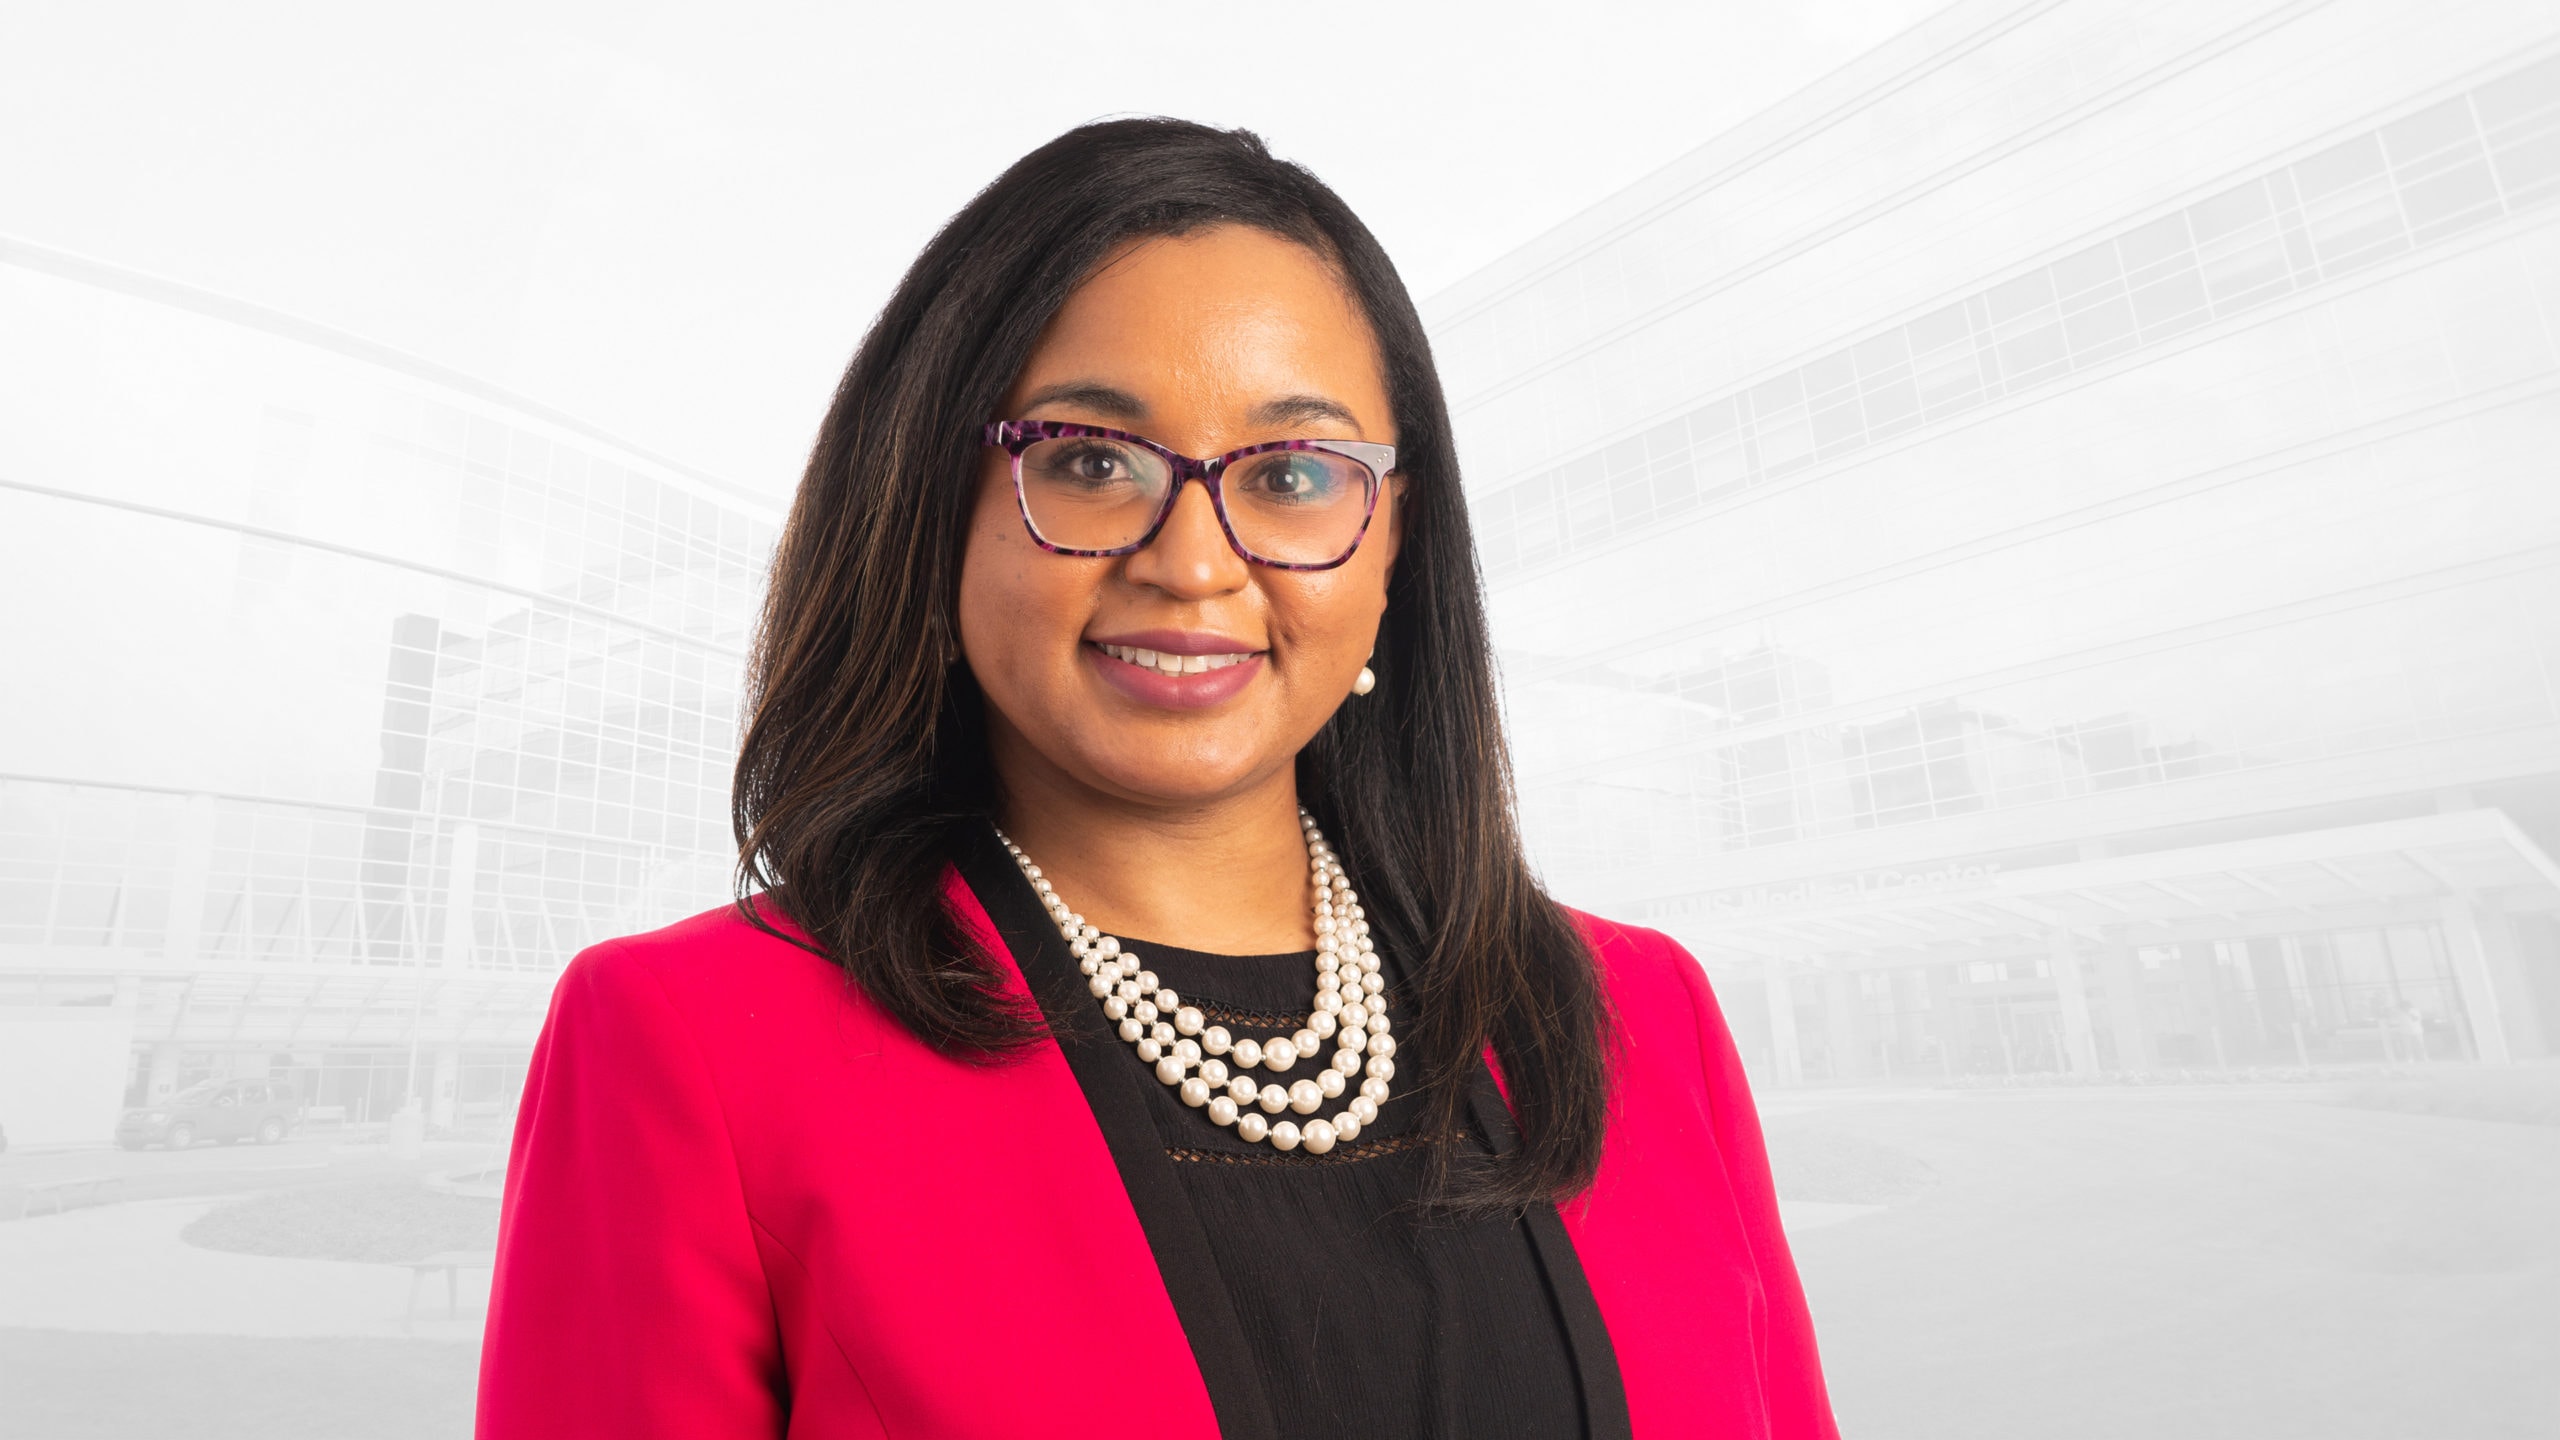 Shanea Nelson is the new executive director of the Pathways Academy at UAMS.